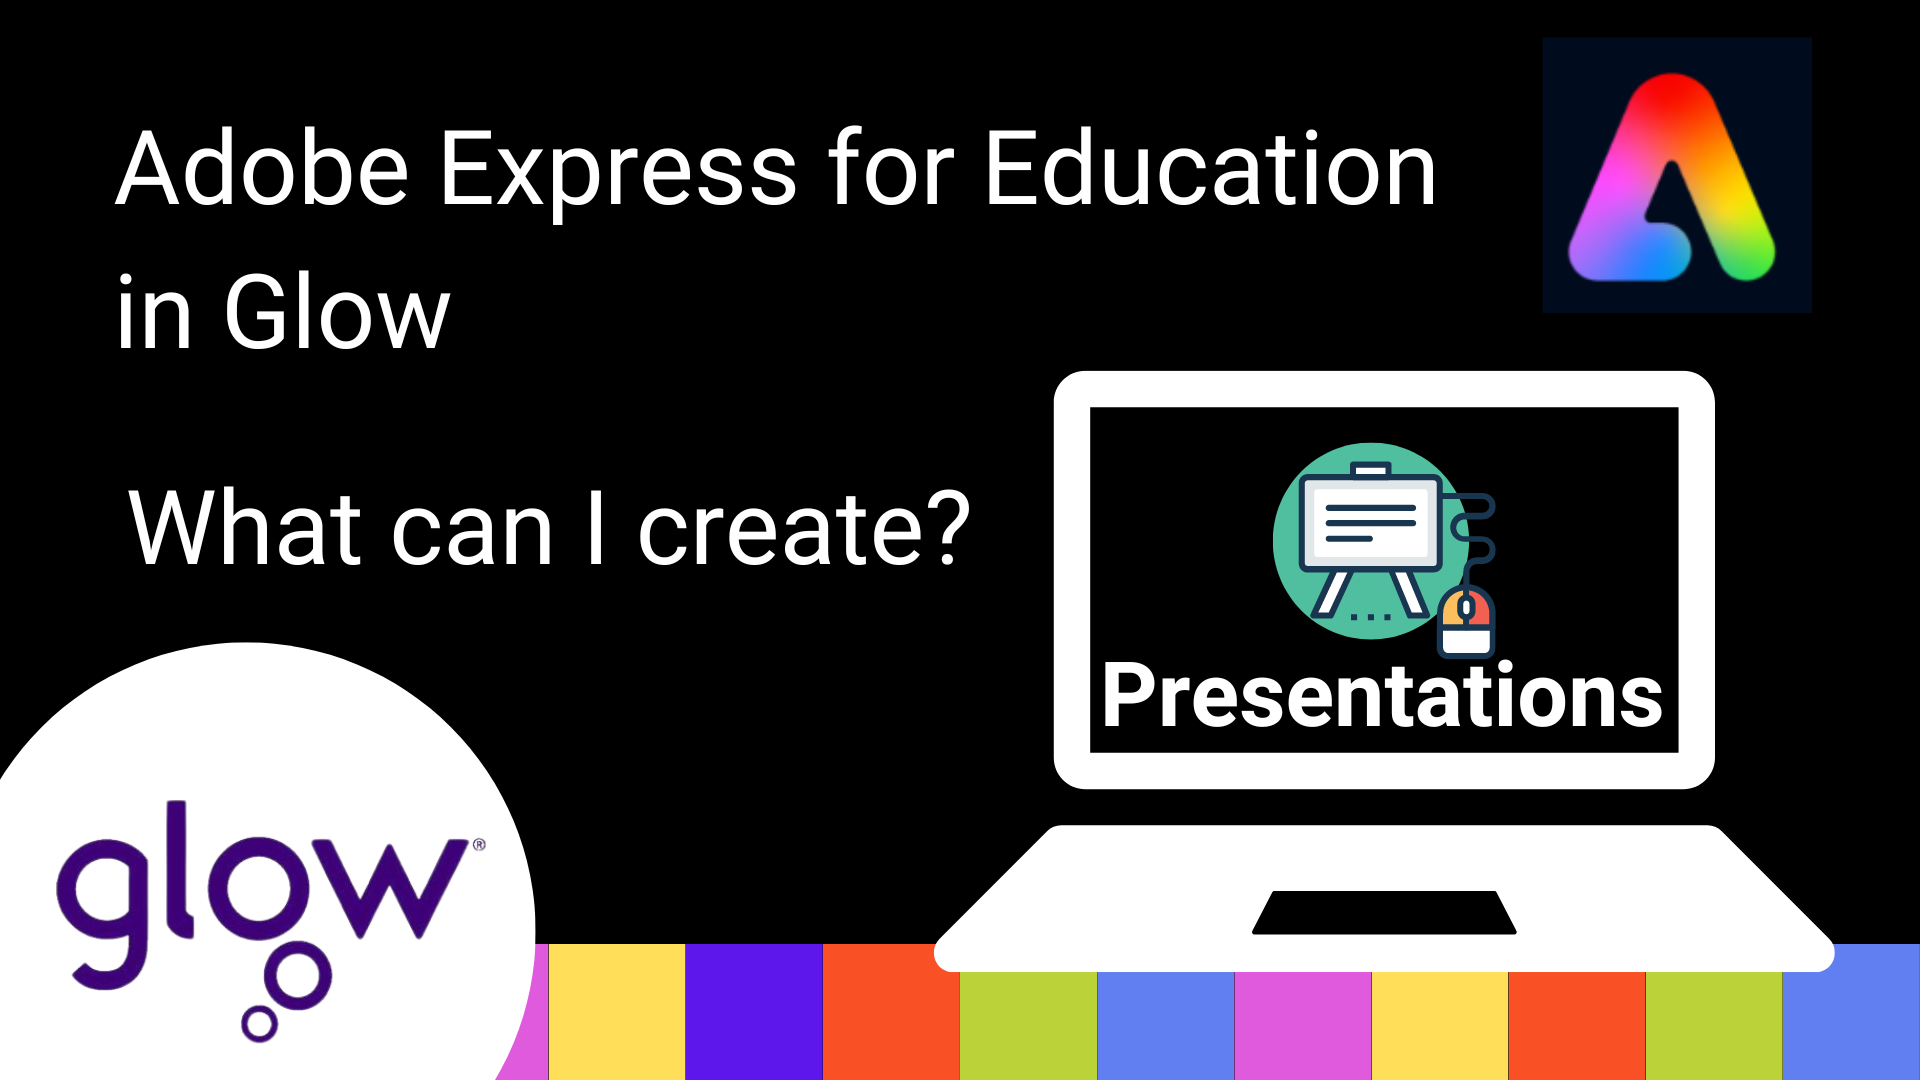 Adobe Express for Education in glow graphic. What can I create? Presentations